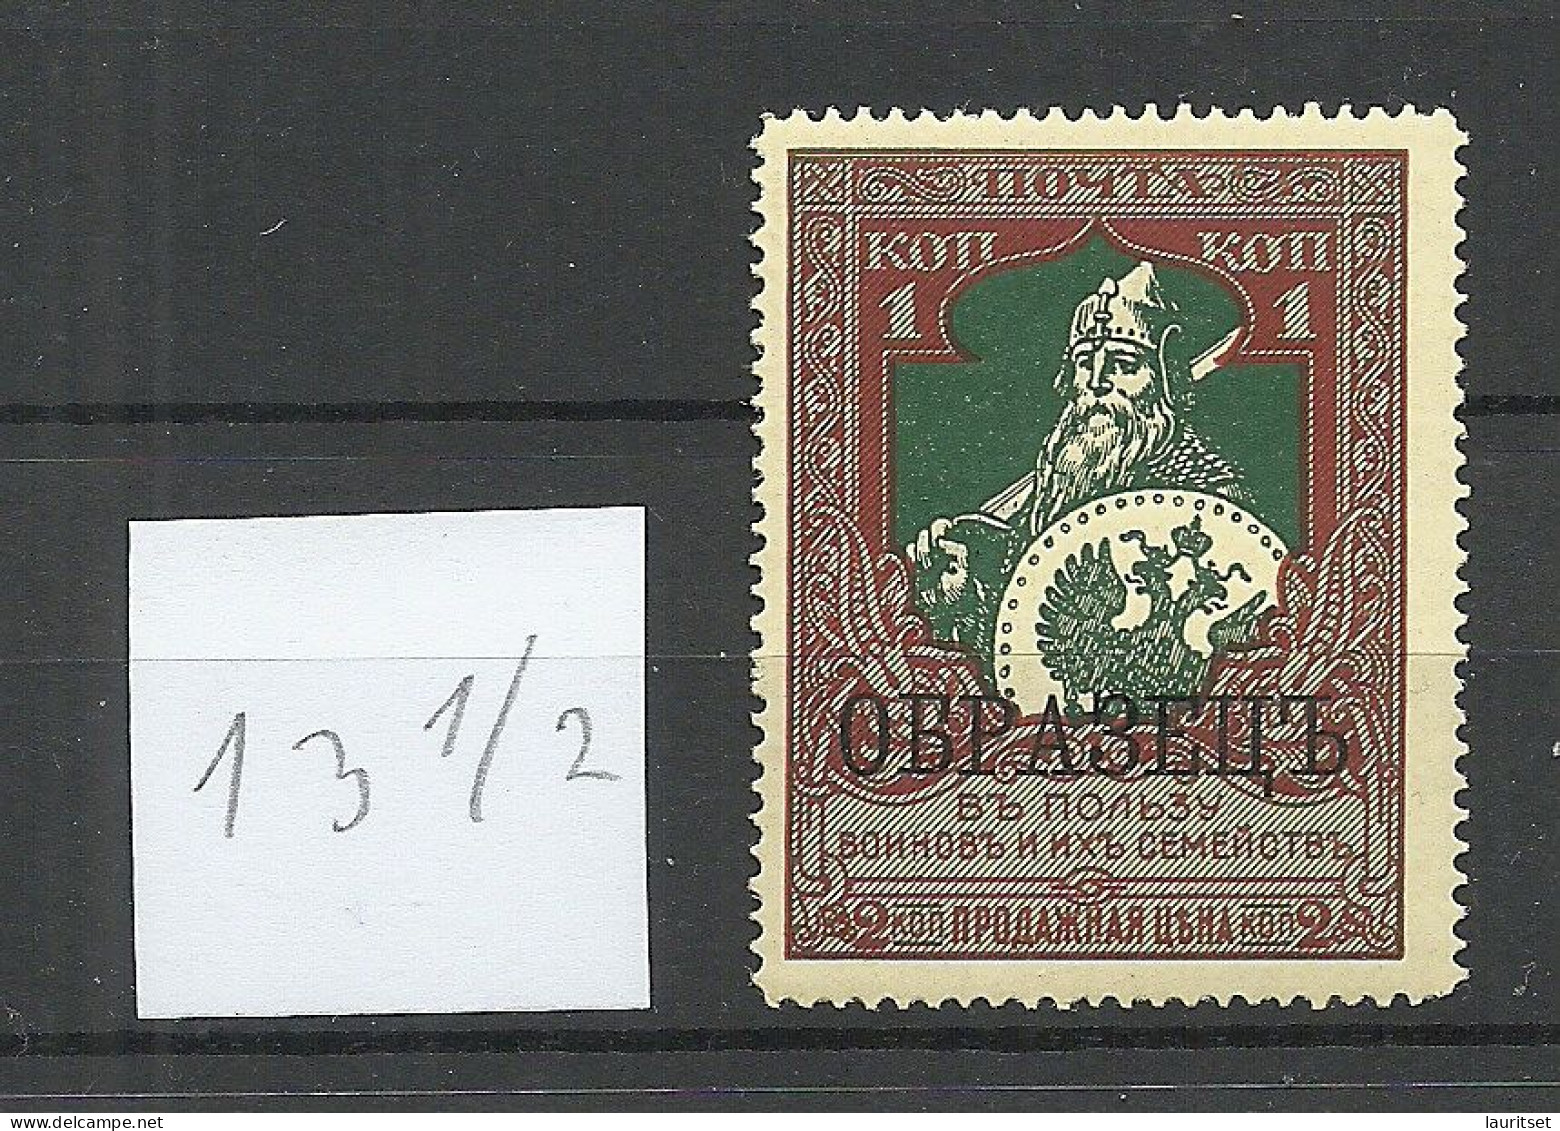 RUSSLAND RUSSIA 1914 Michel 99 C (perf 13 1/2) Proof Essay MNH - Unused Stamps